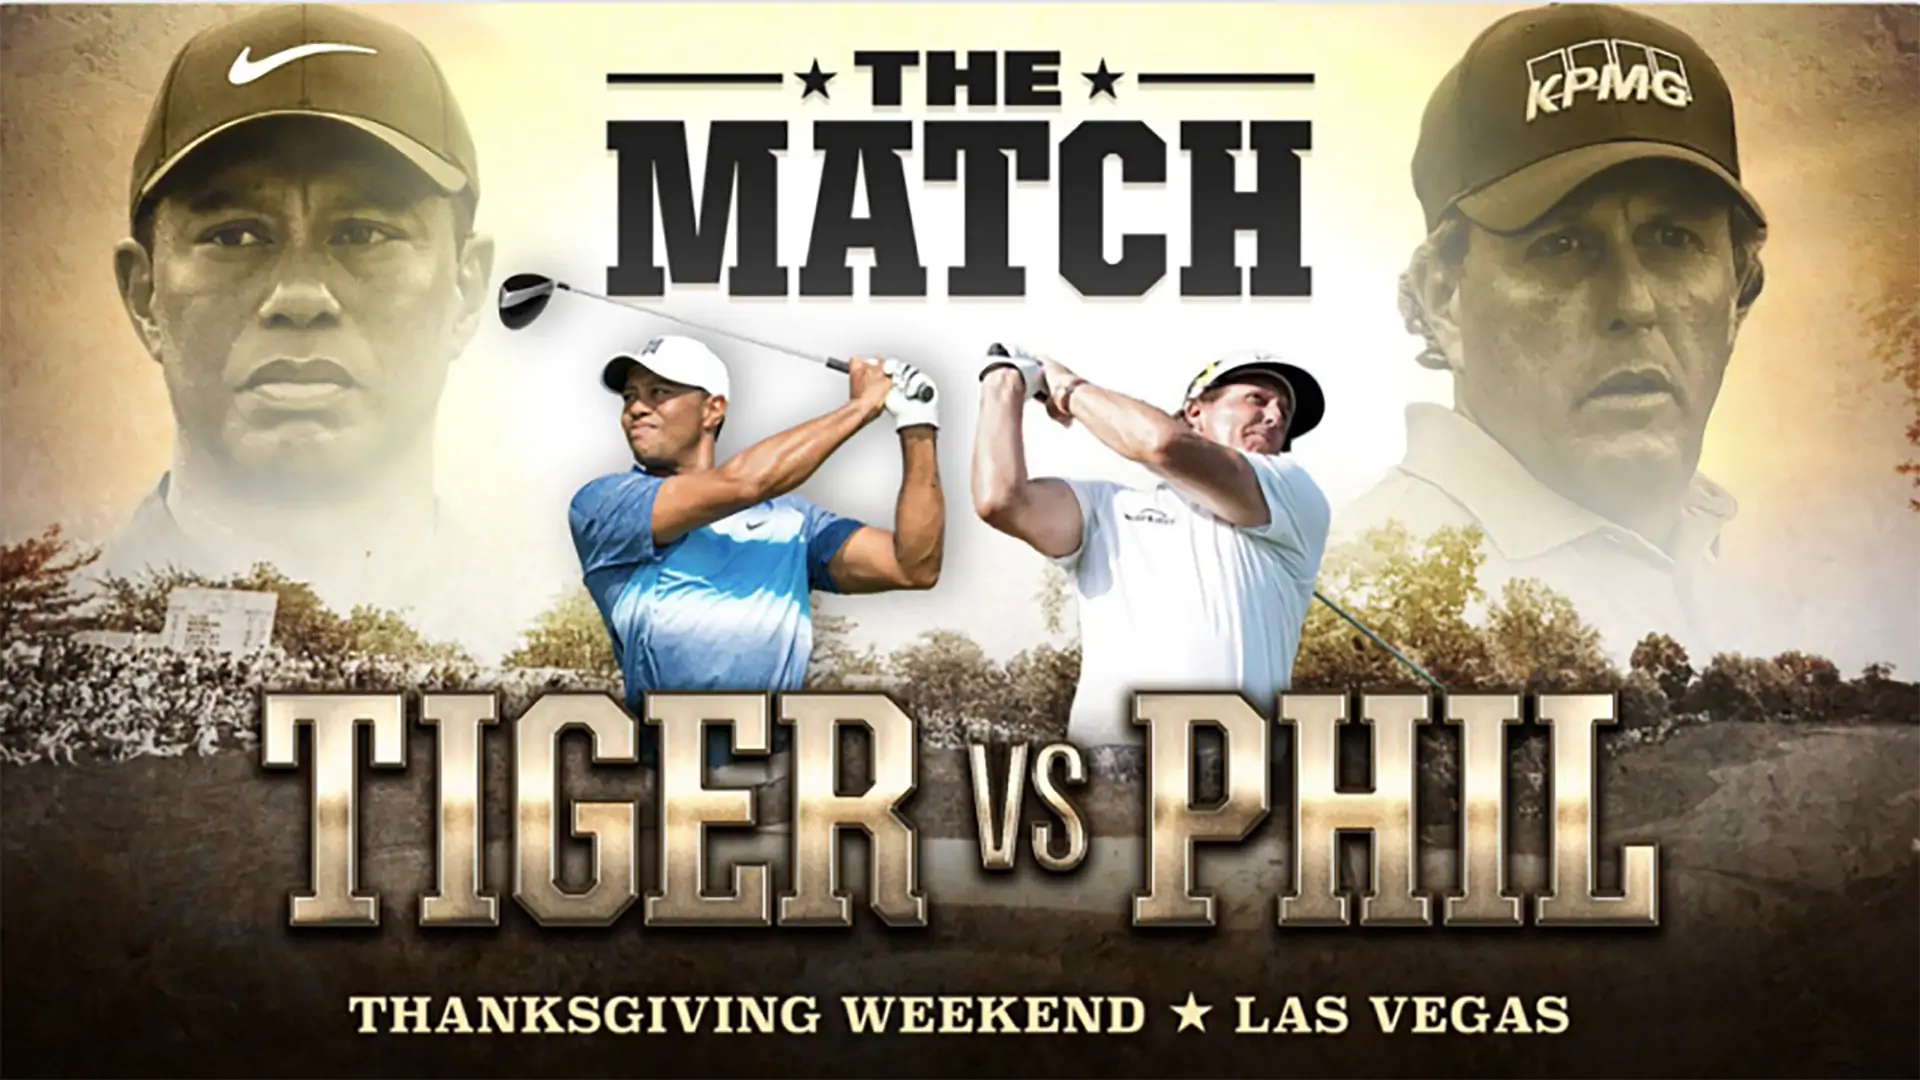 Phil, Tiger plan to donate portion of match proceeds to charity